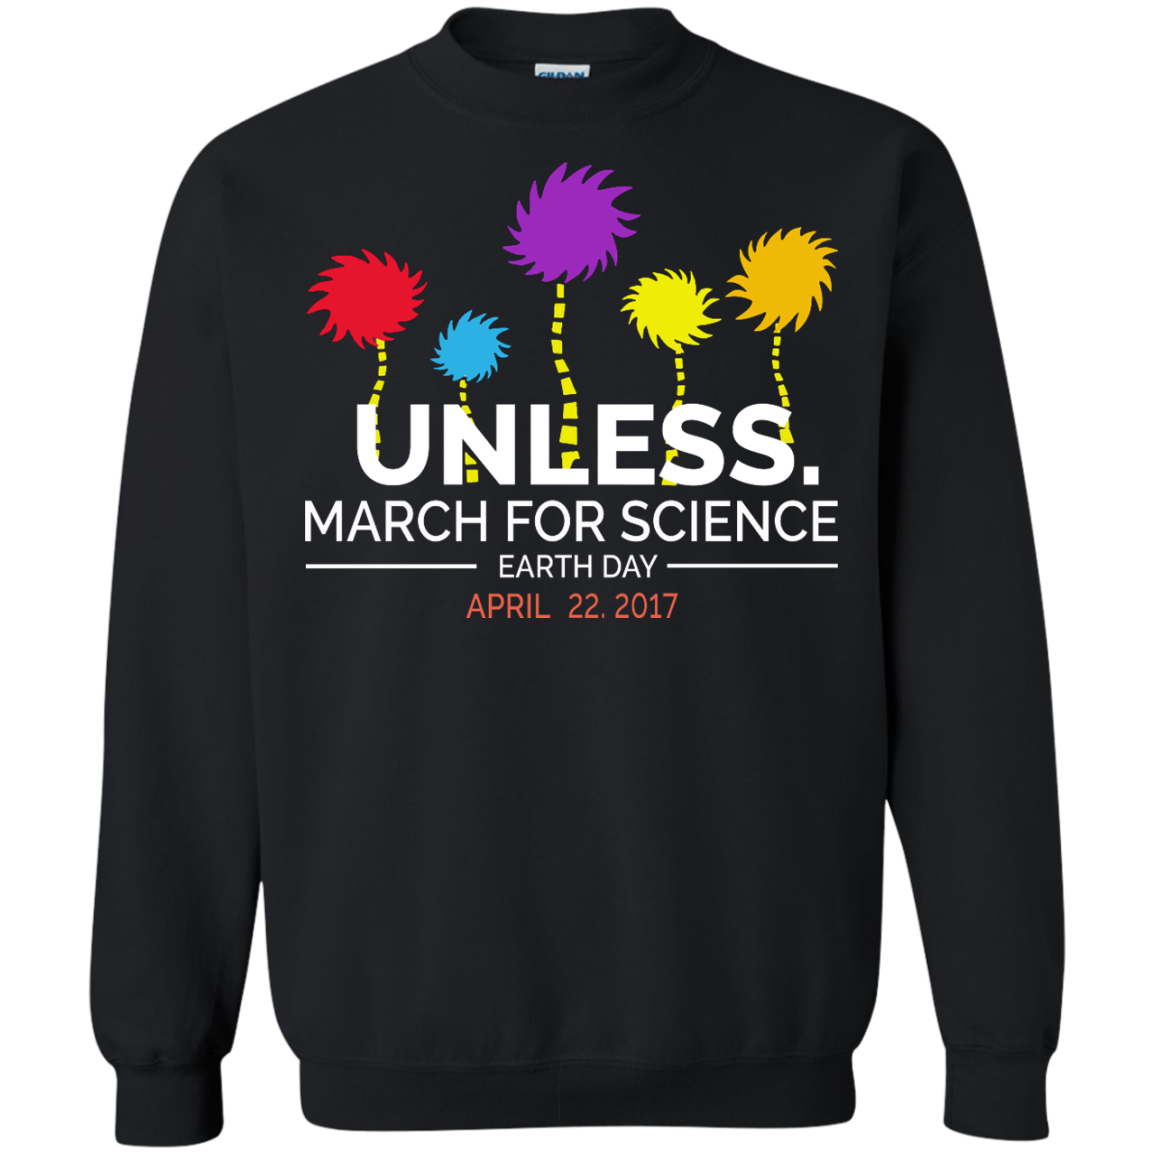 Unless March for Science sweatshirt in black